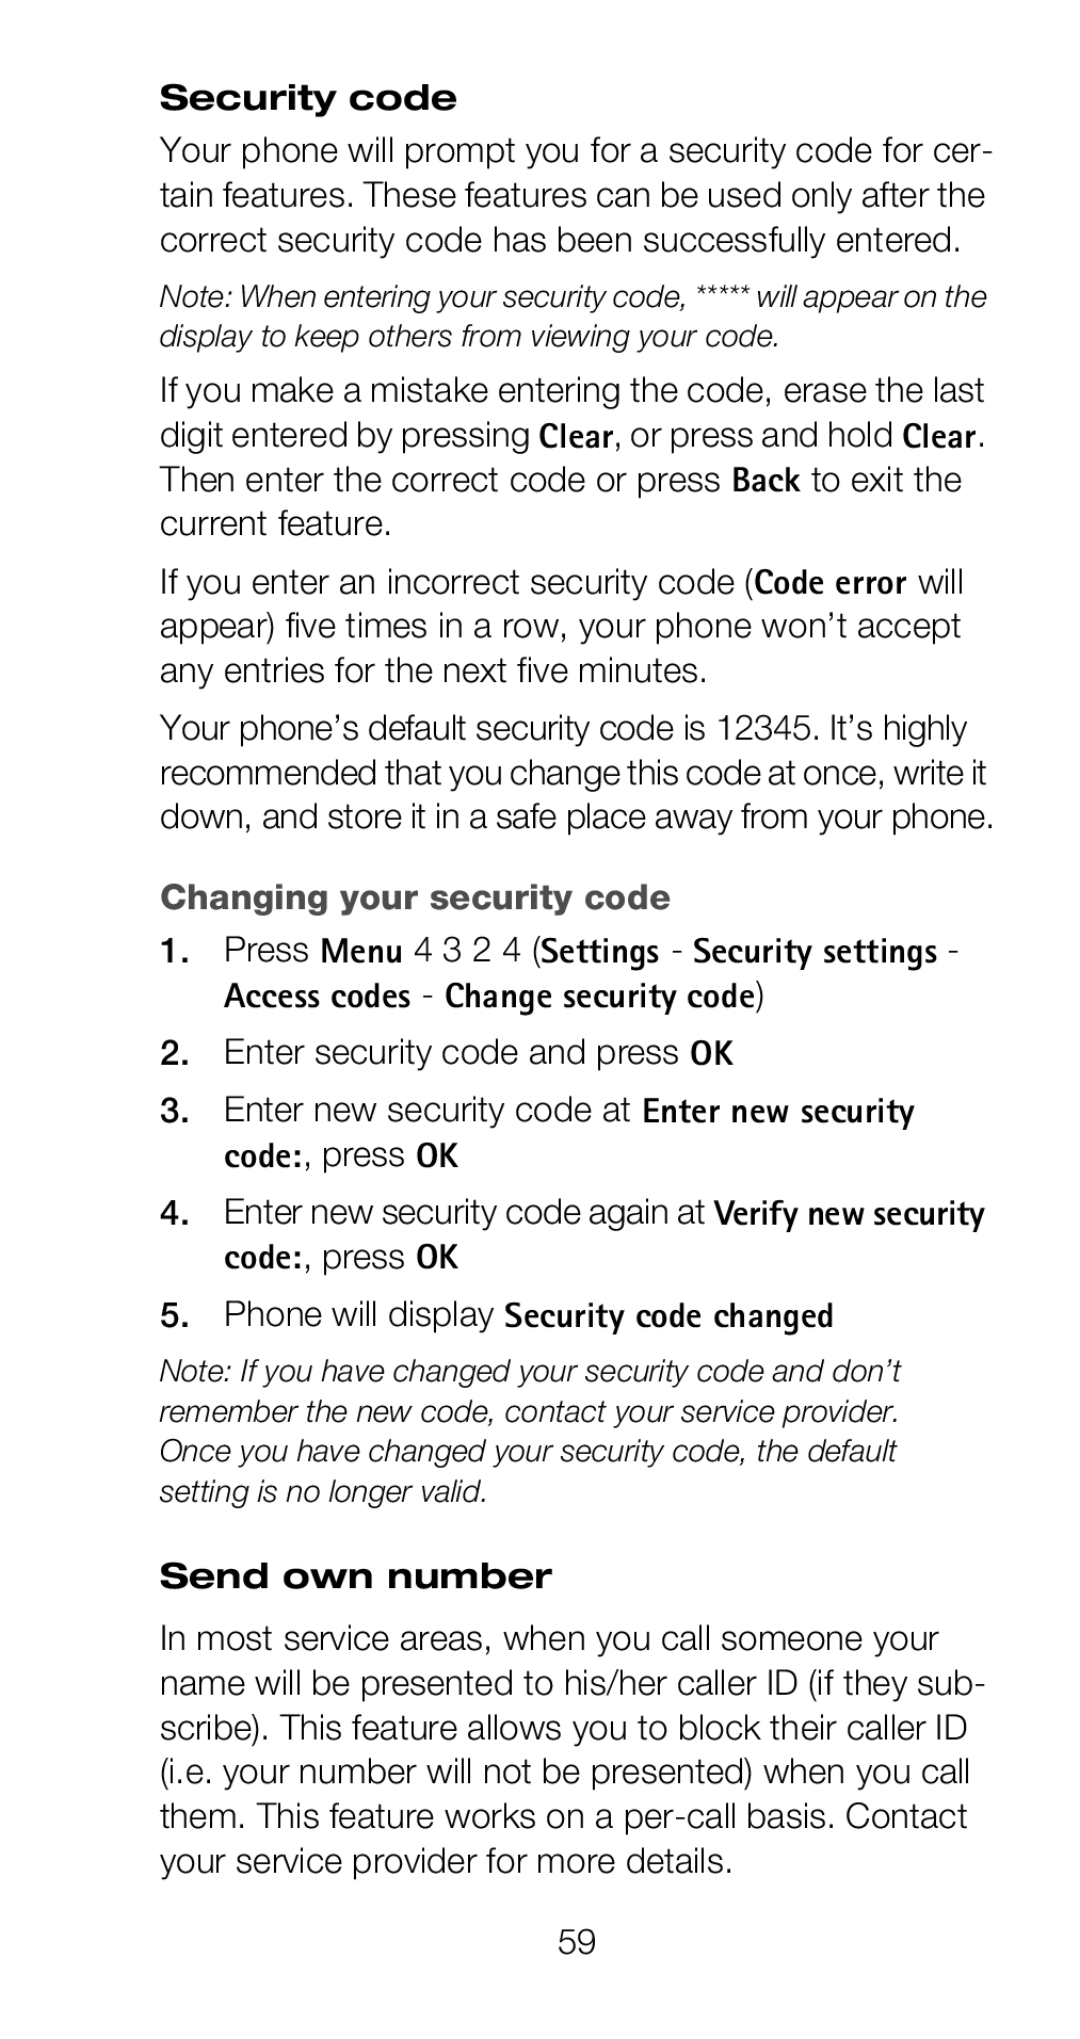 Nokia 6160 manual Changing your security code, Phone will display Security code changed Send own number 